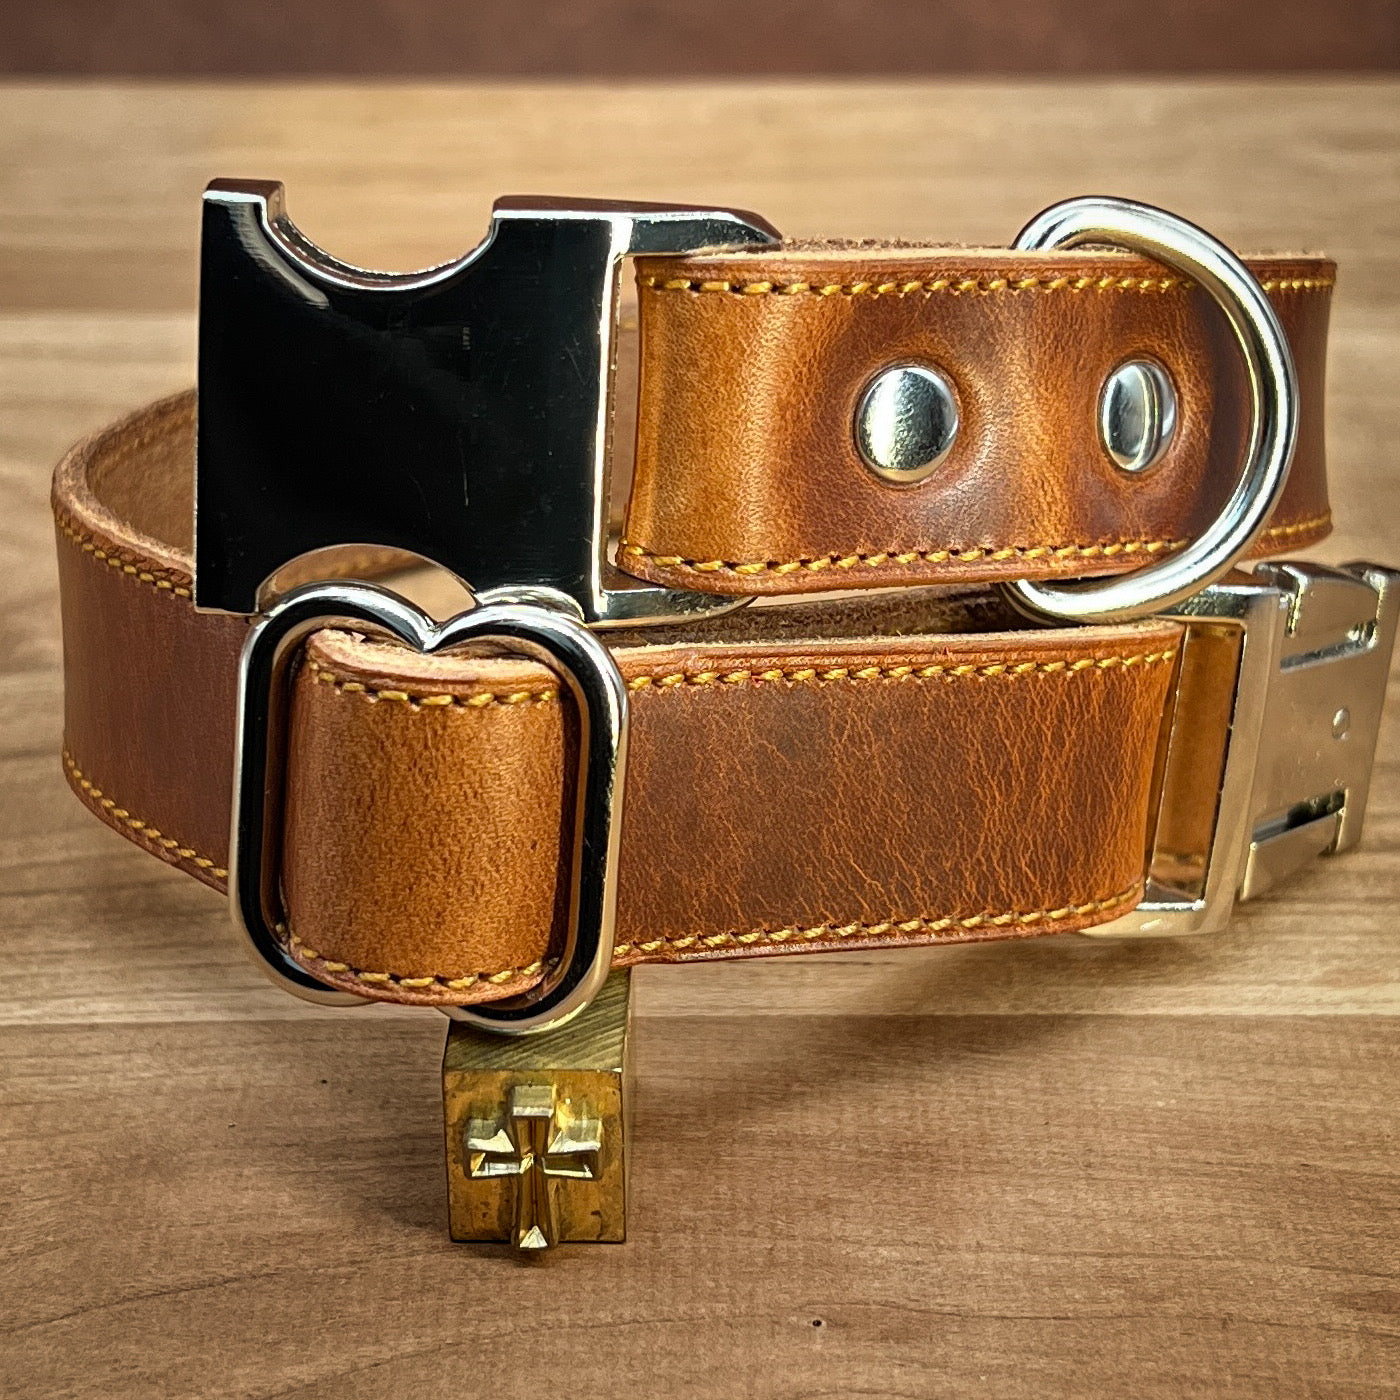 Customizable Quick Release Dog Collars in Horween Leather, Made to order